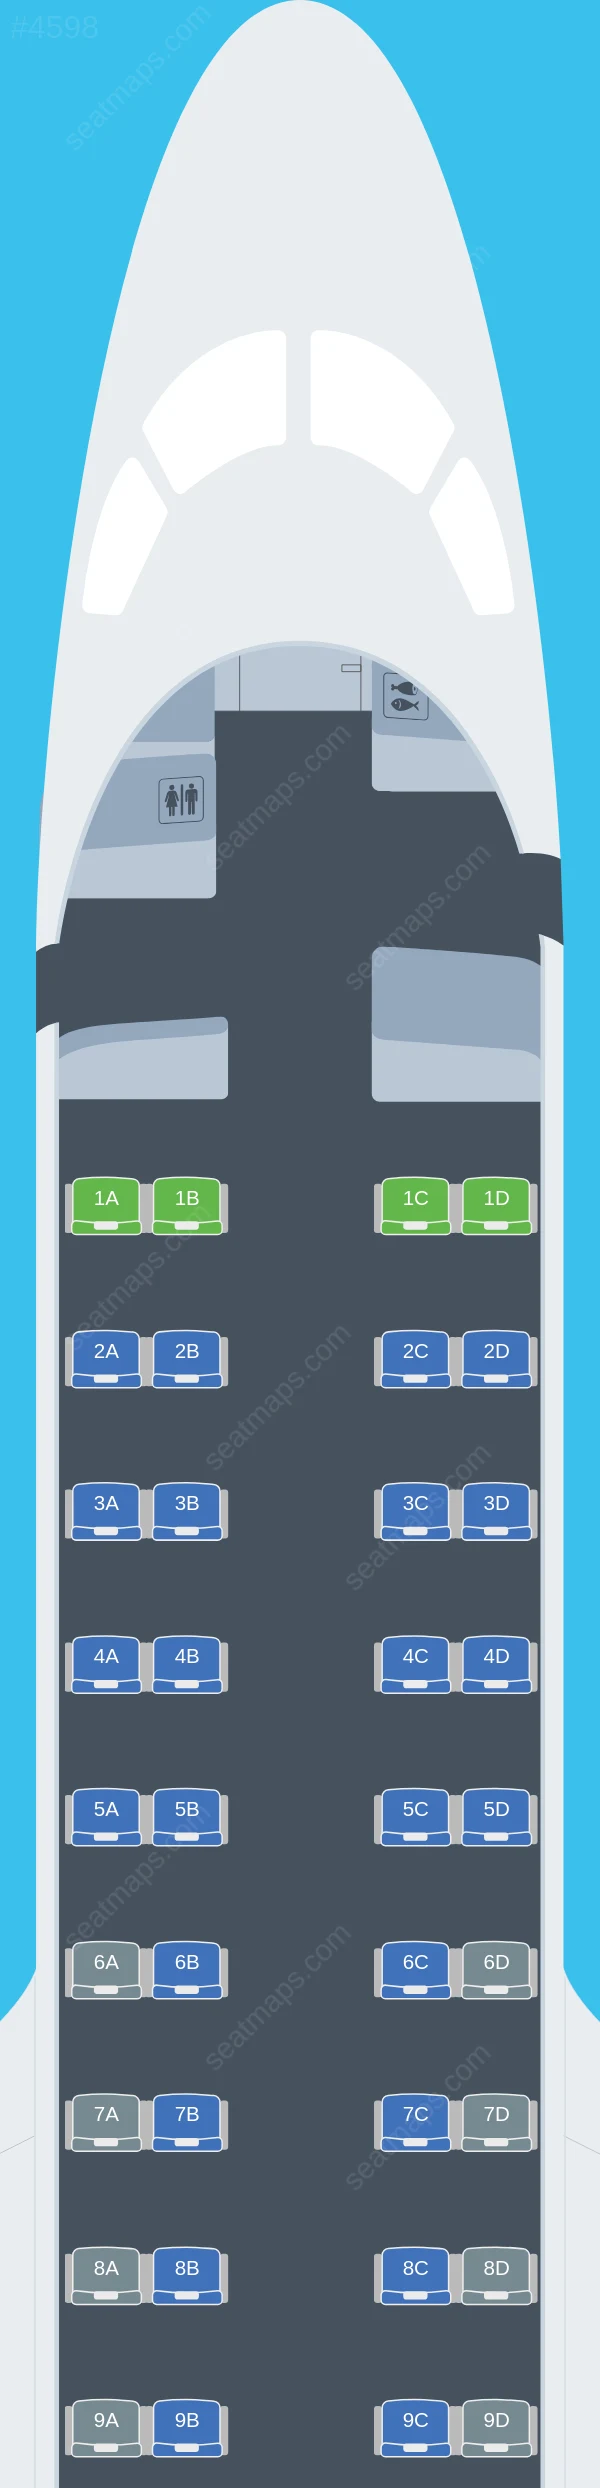 People's Embraer E170 seatmap preview